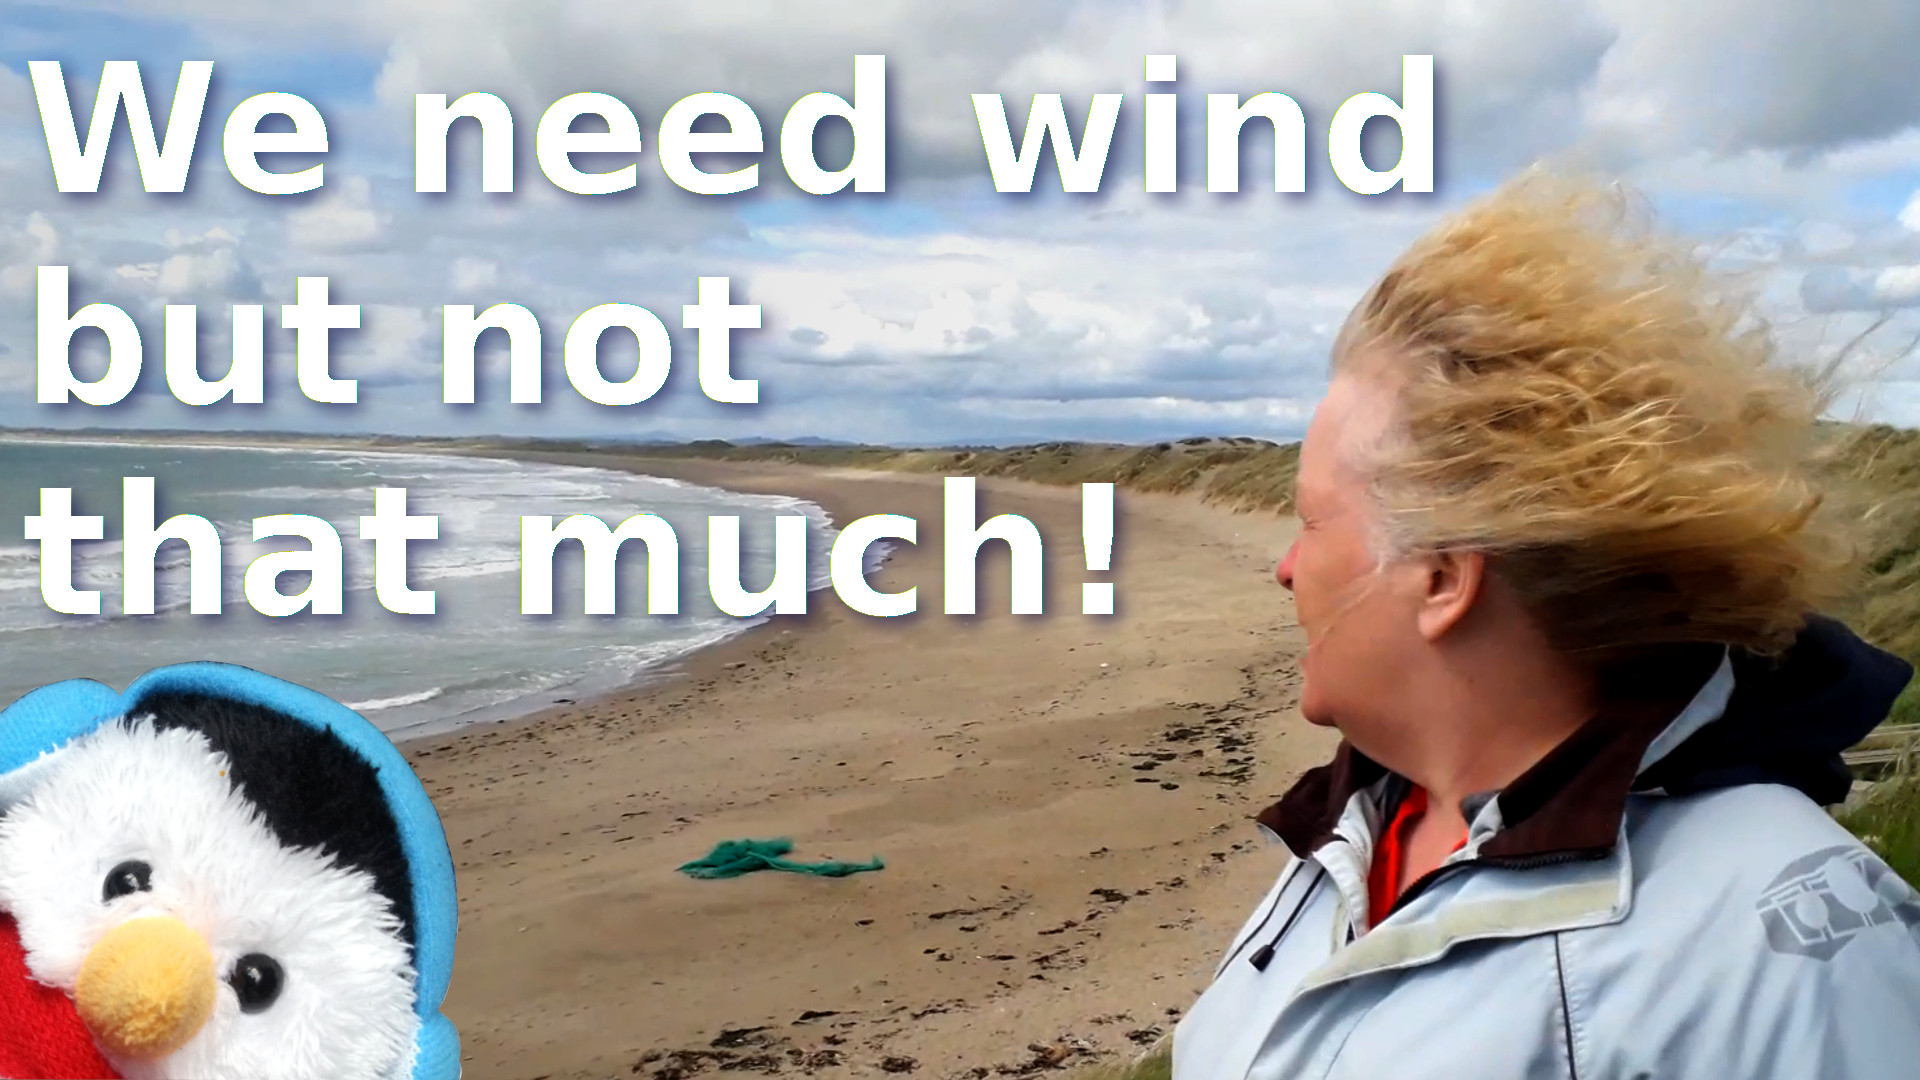 Watch our "We need wind but not that much!" video and add comments